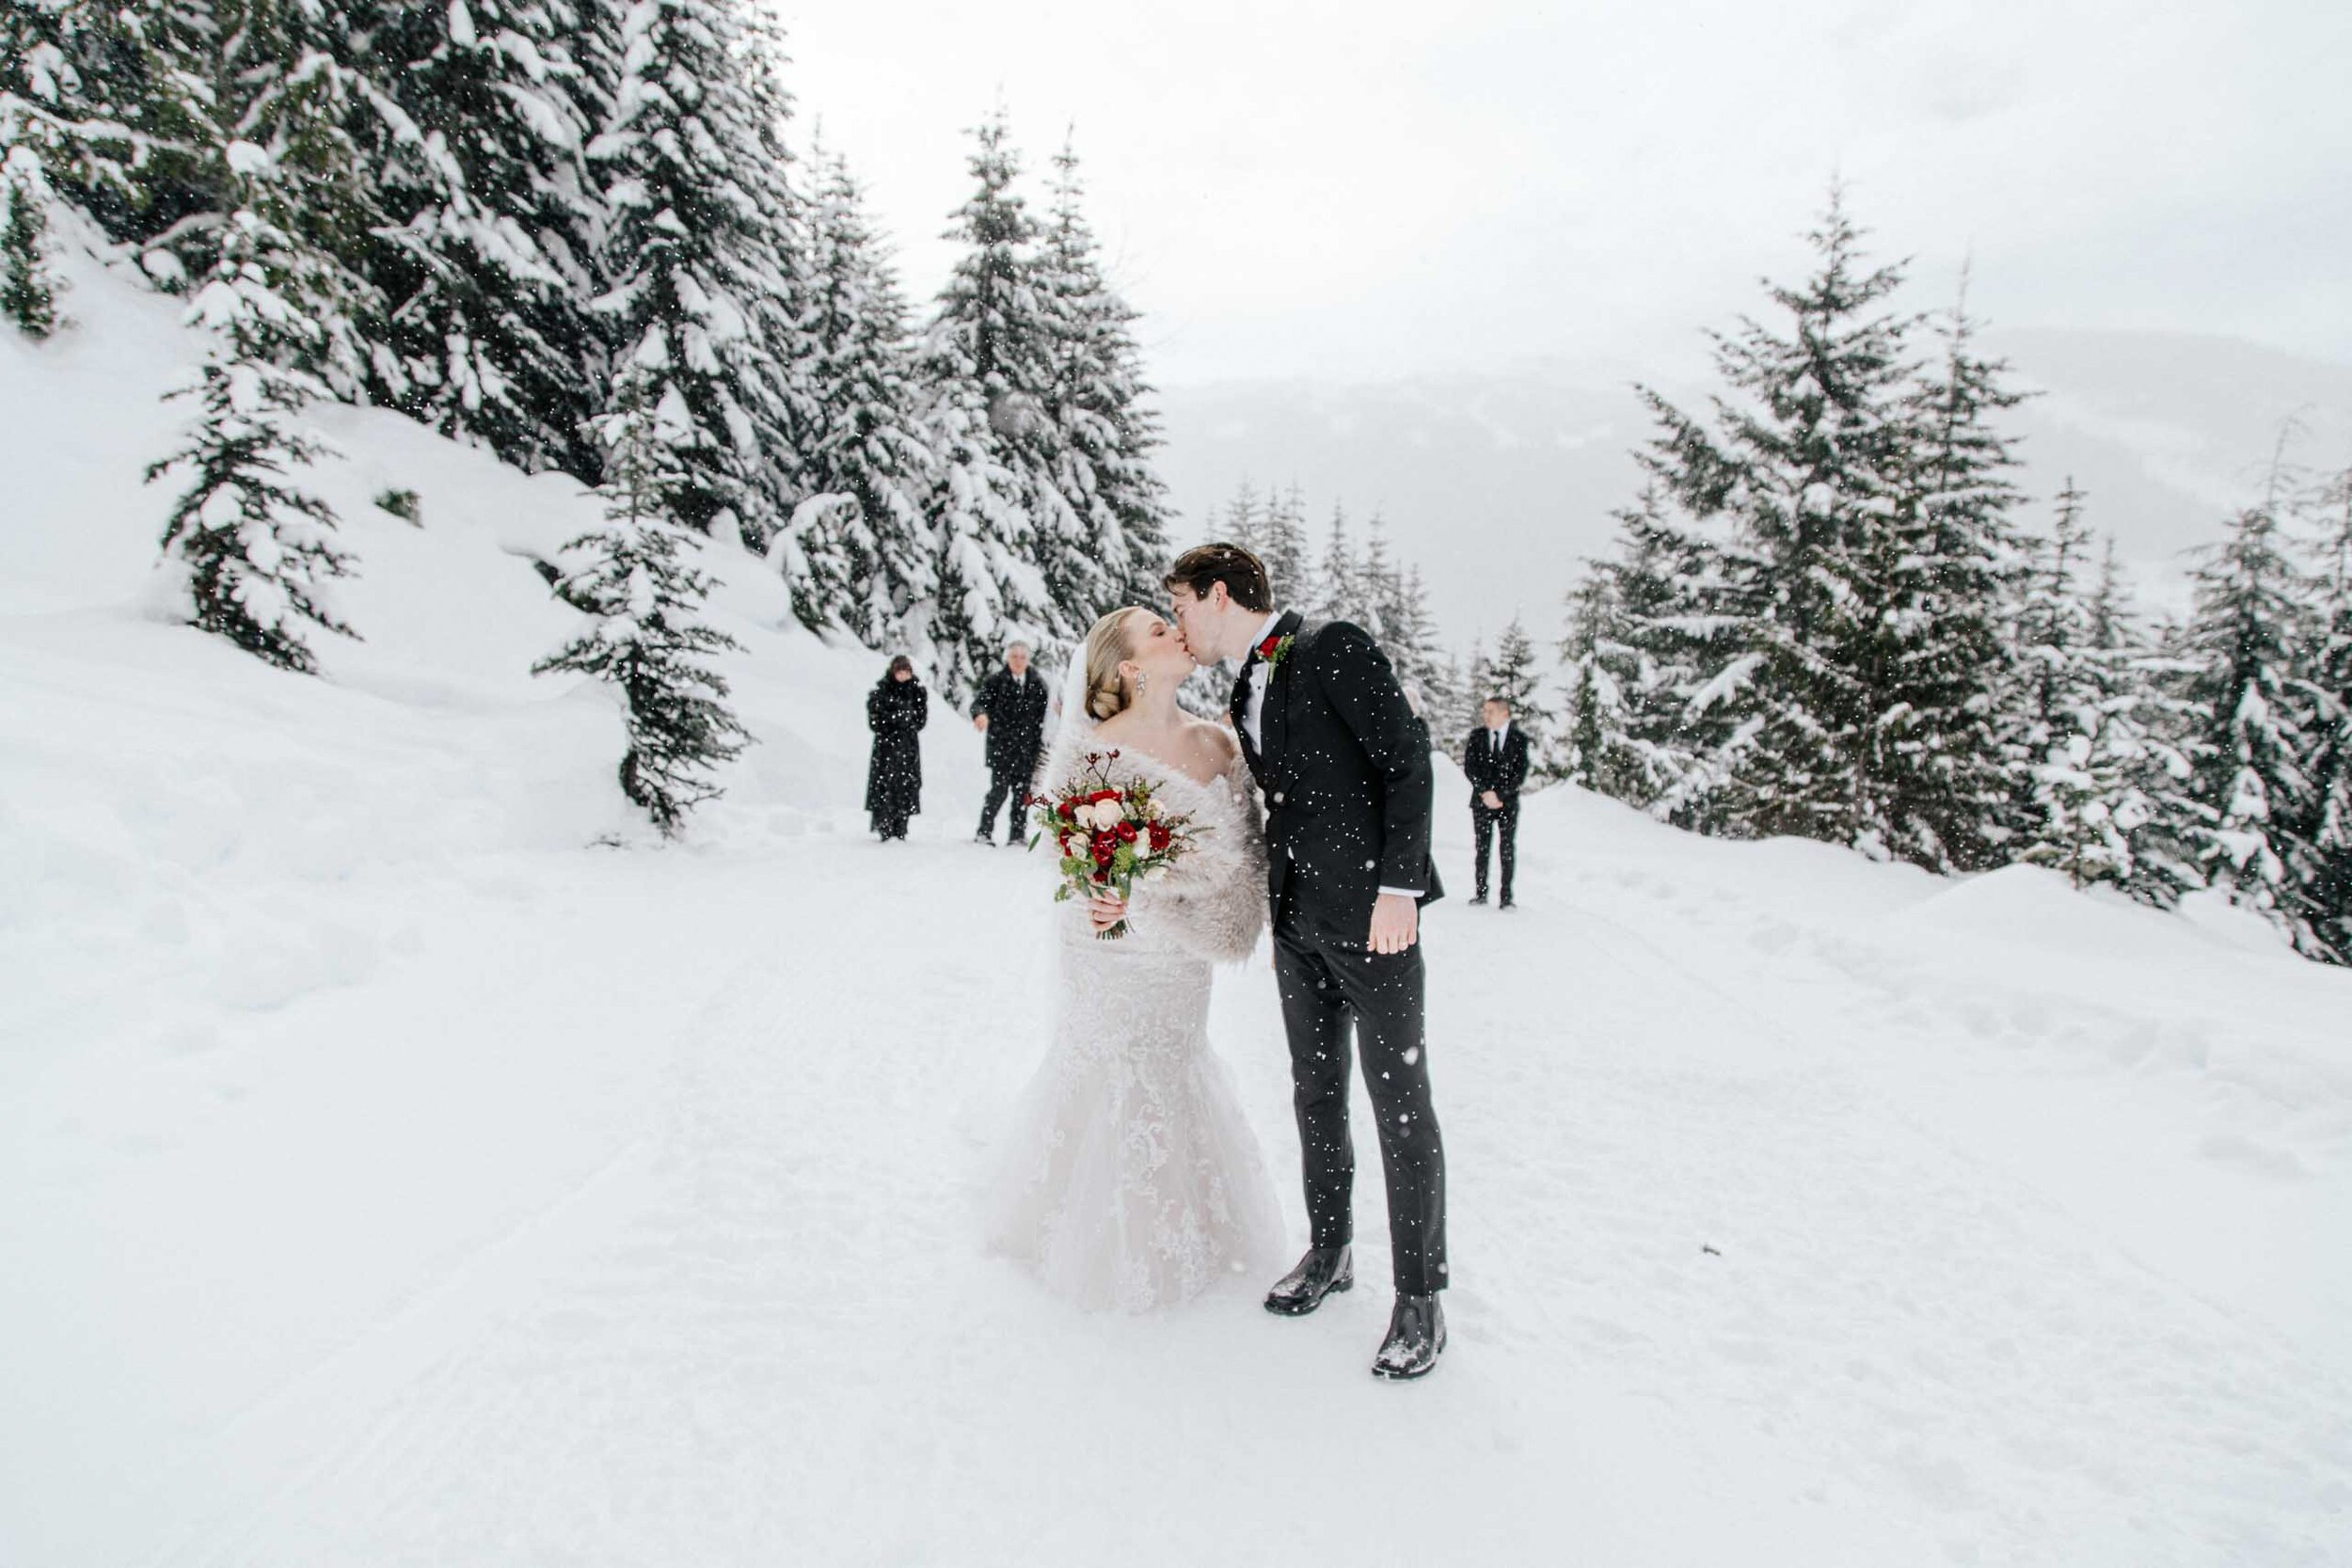 A bride in a fur stole and lace dress kisses her groom in the snow.